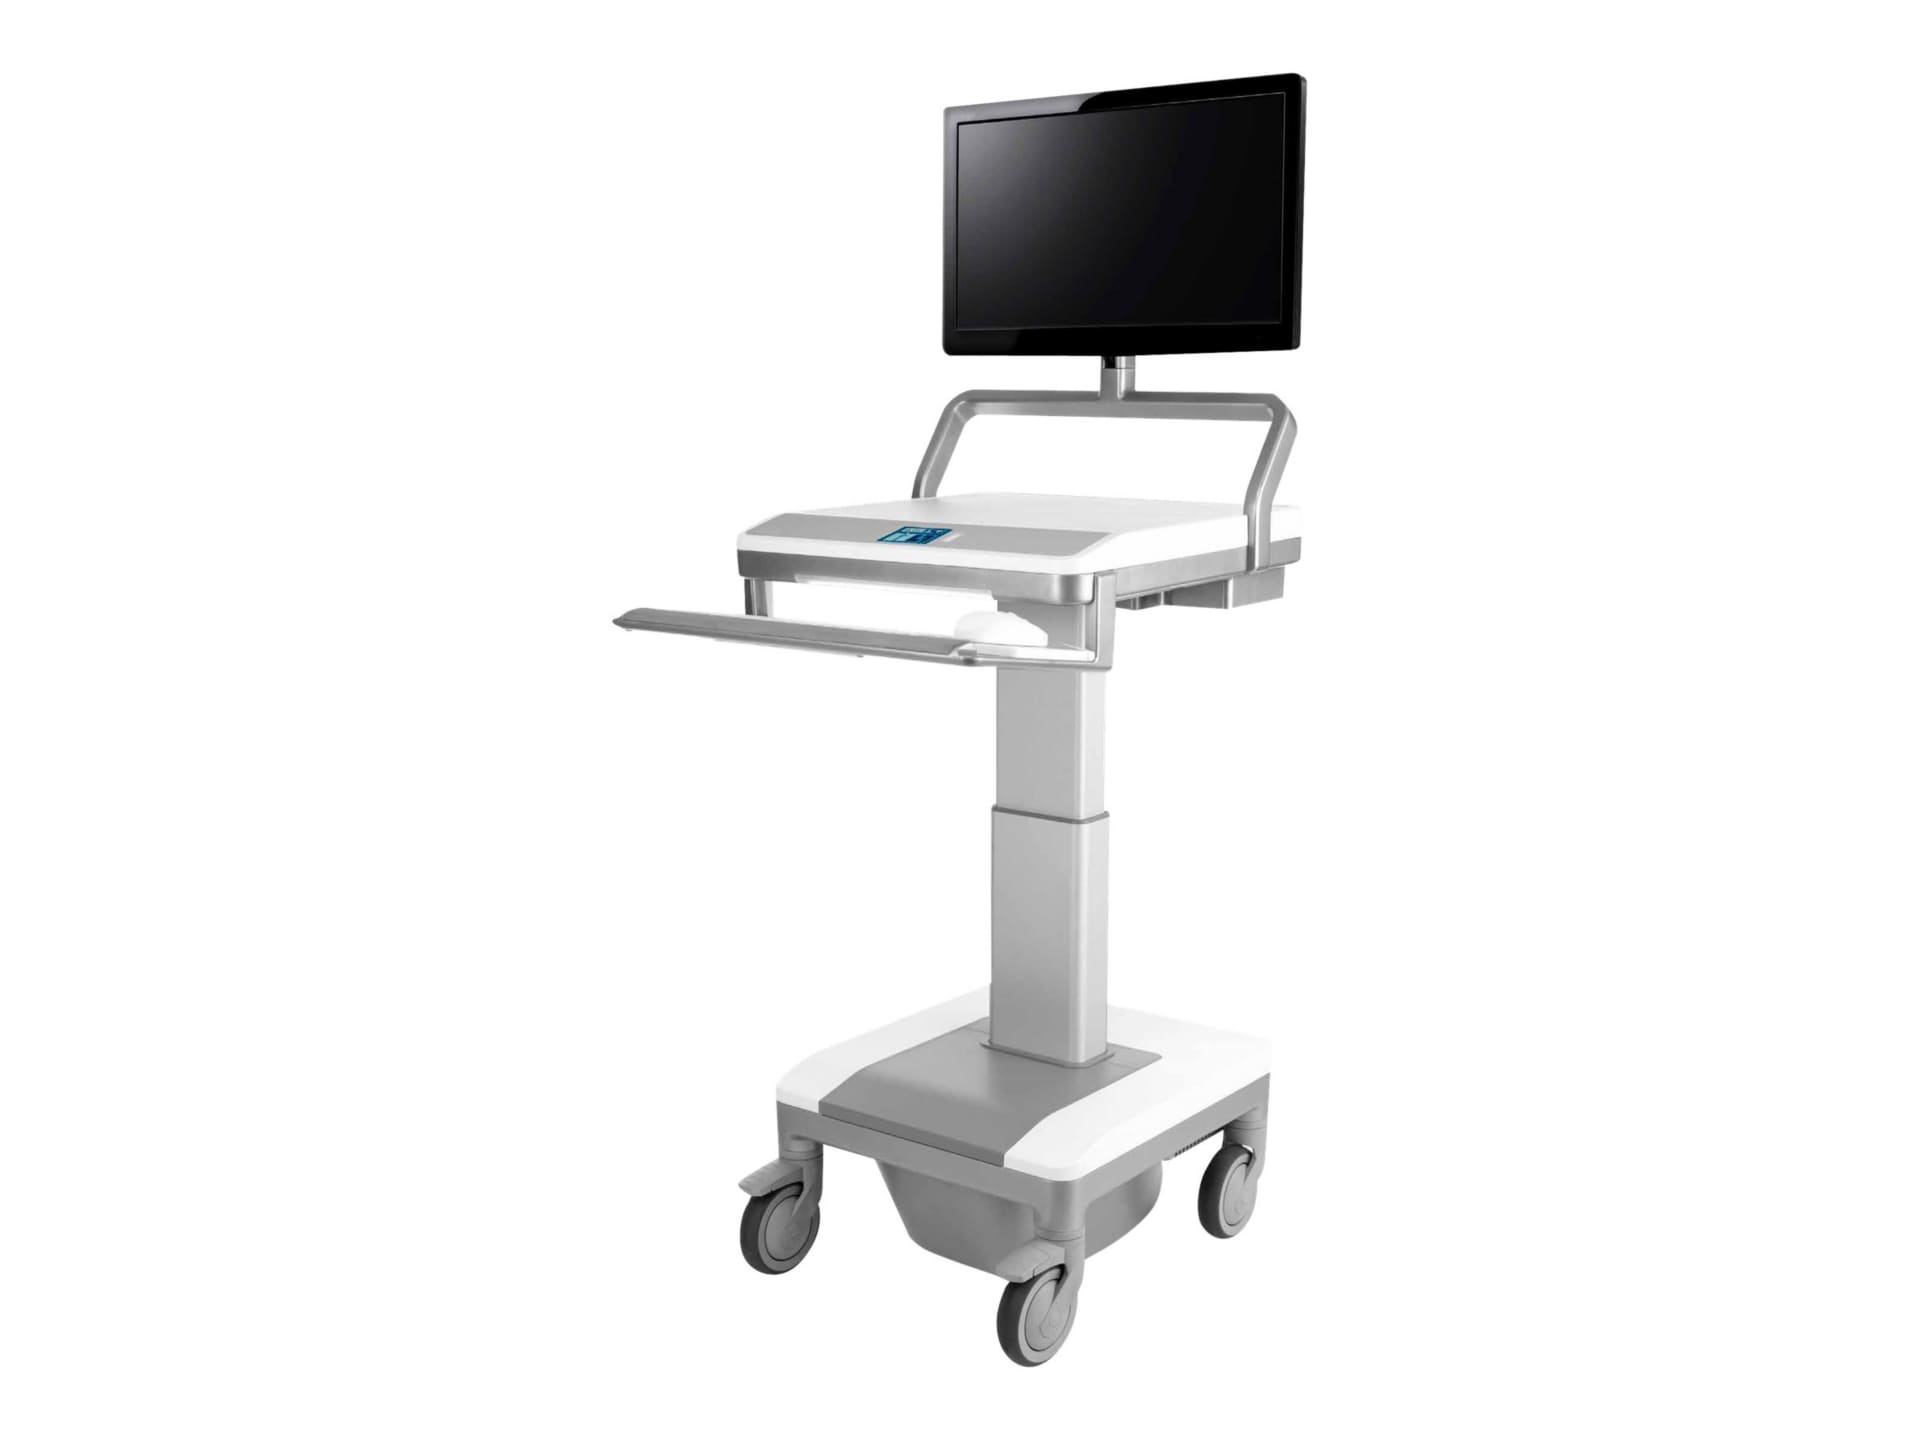 Capsa Healthcare T7 Powered Technology Cart - cart - for LCD display / keyb